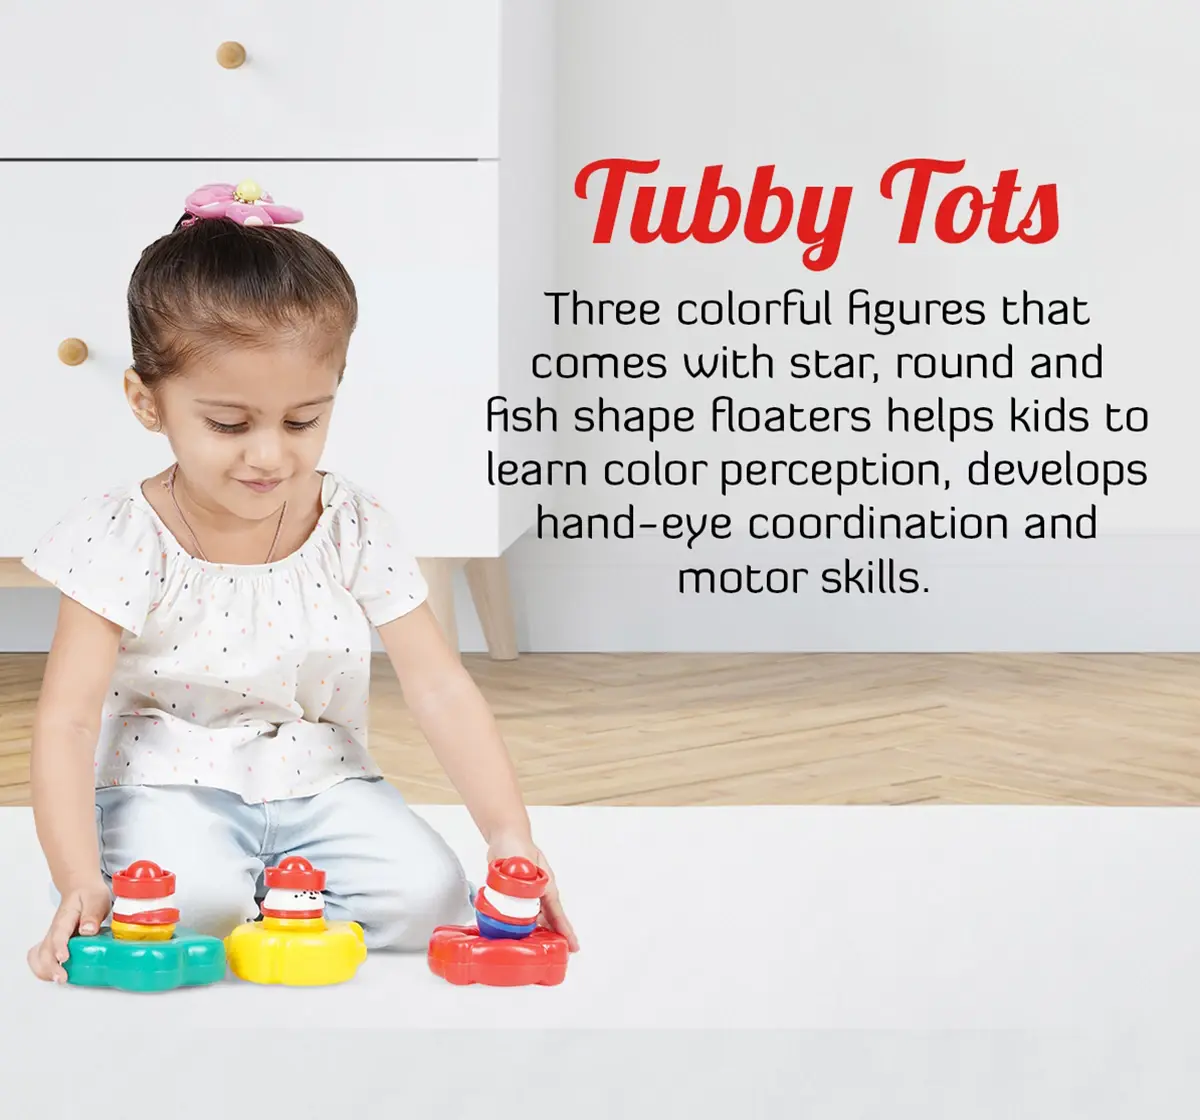 Ok Play Tubby Tots with Star Round Fish Shaped Floaters Toddler-Floater Toy Multicolor 0M+